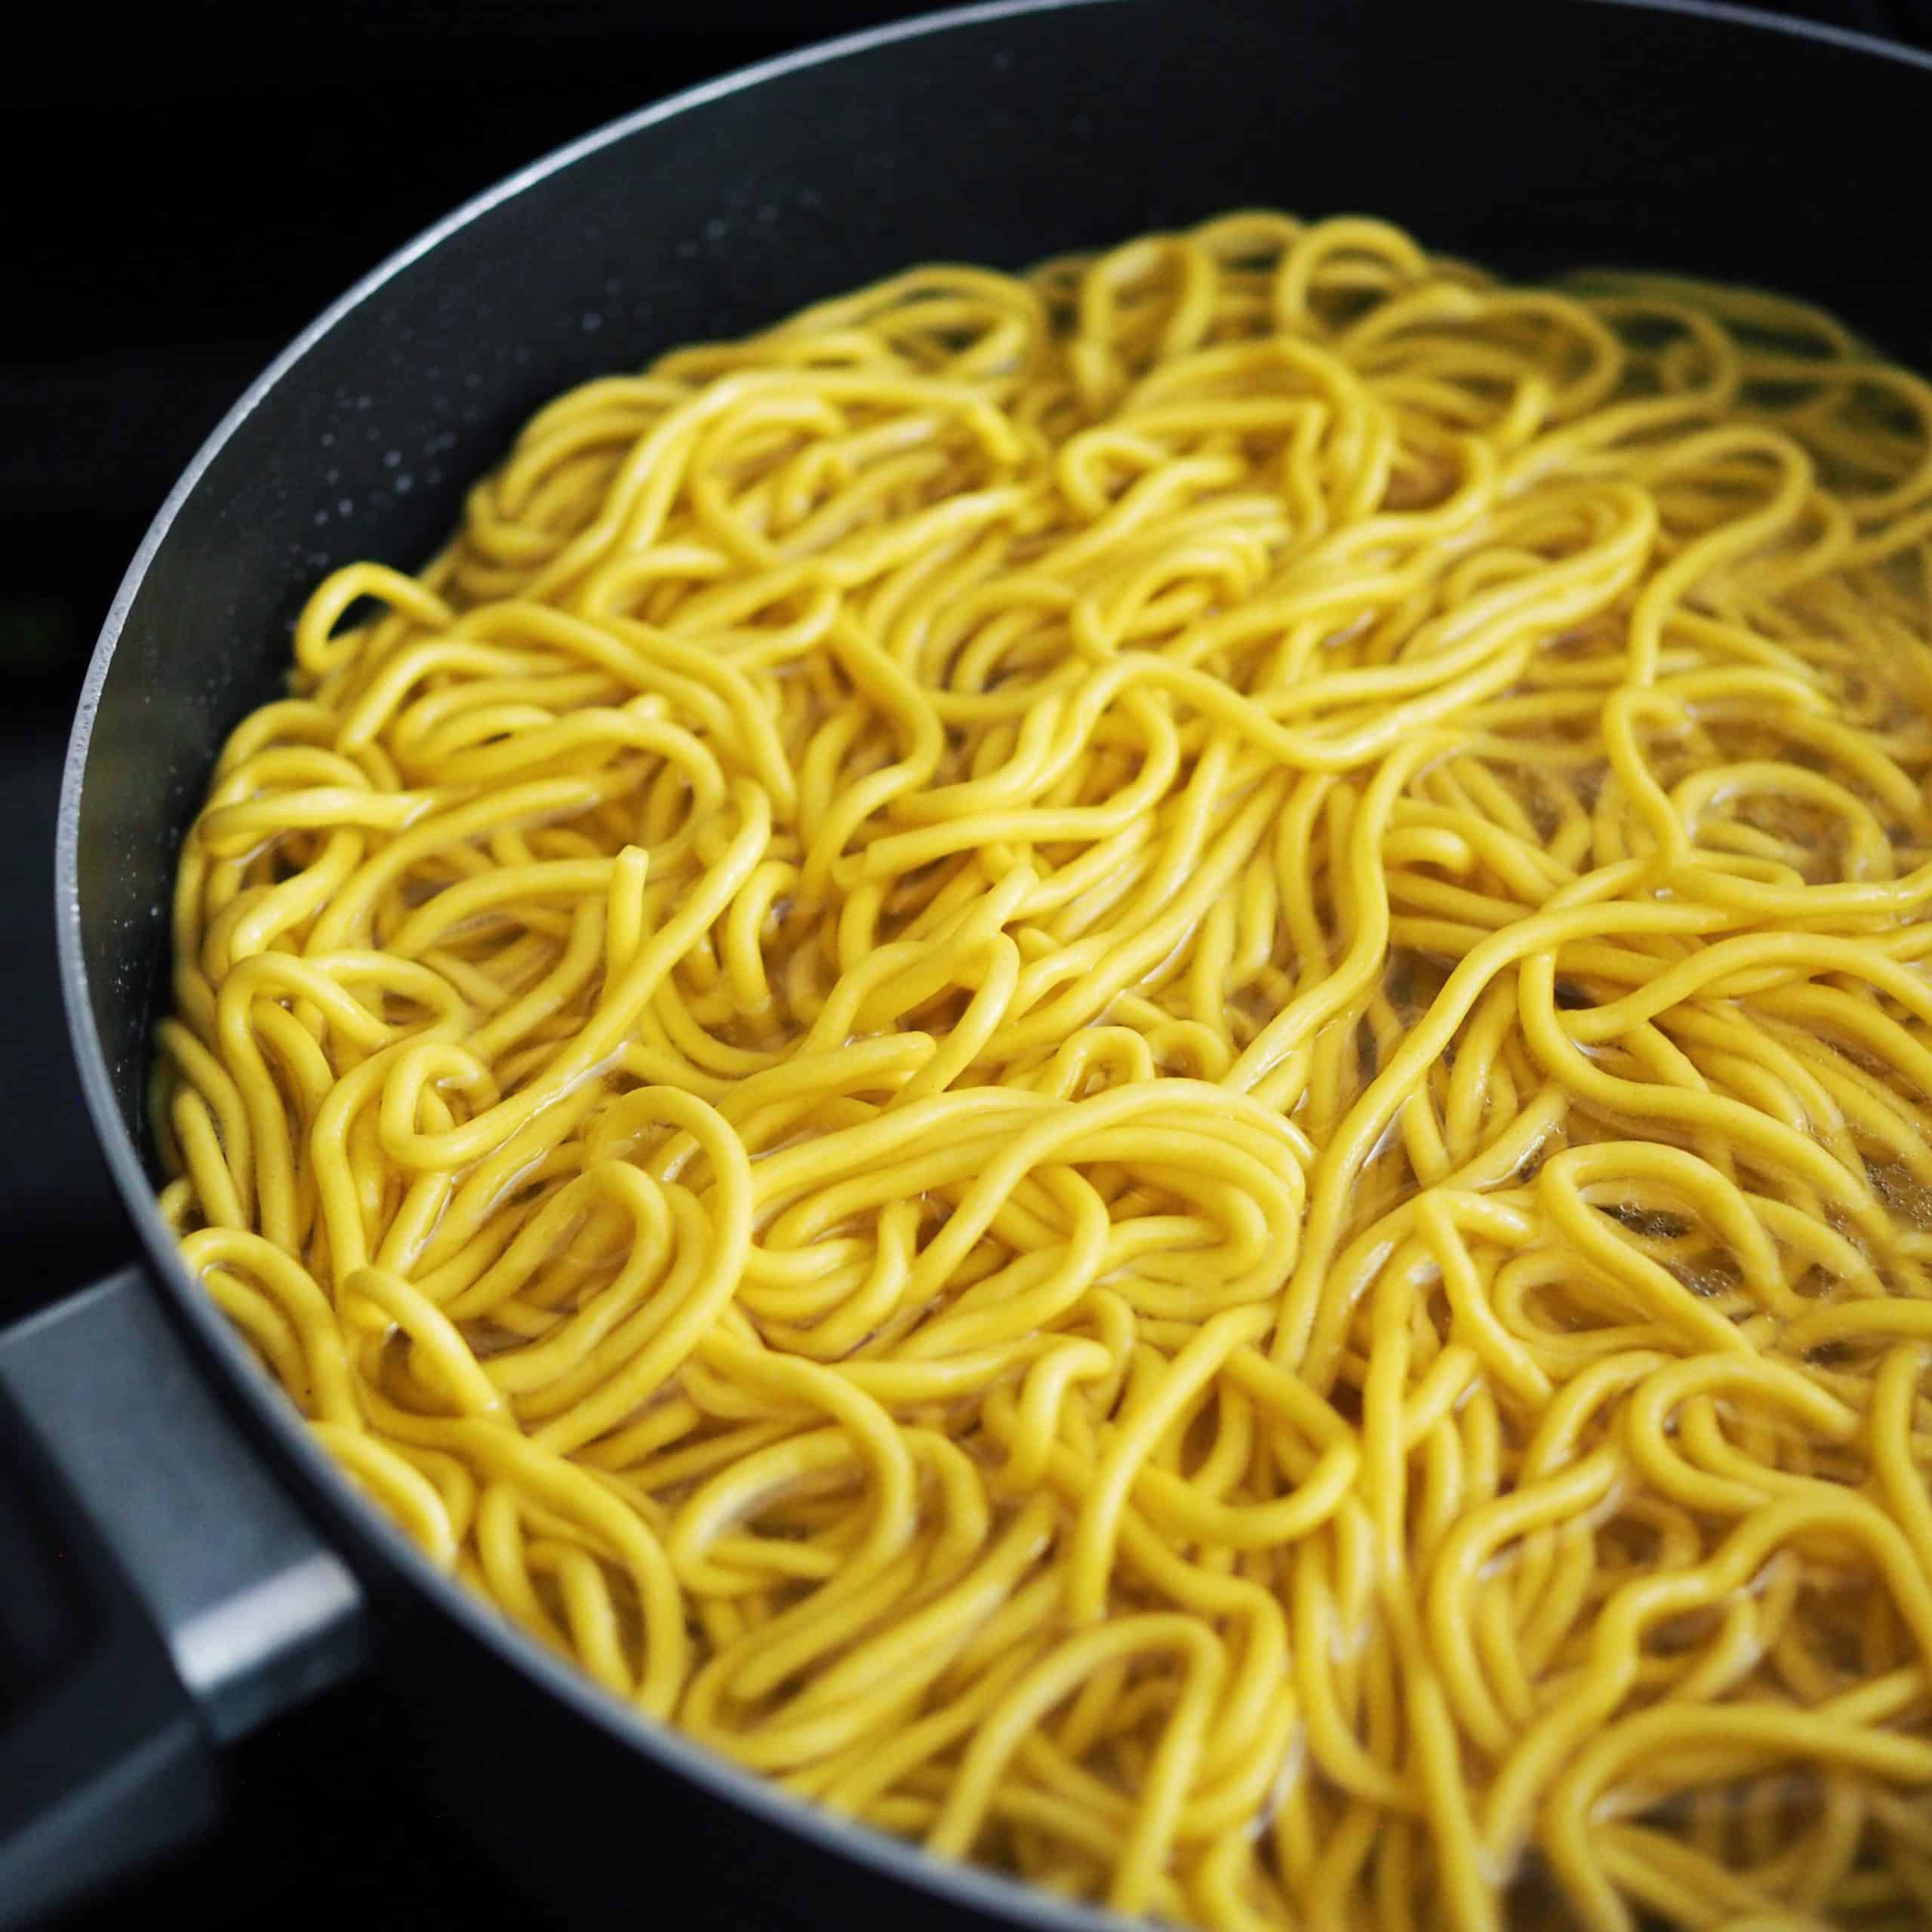 Mee Goreng - How to cook great noodles in 4 quick steps